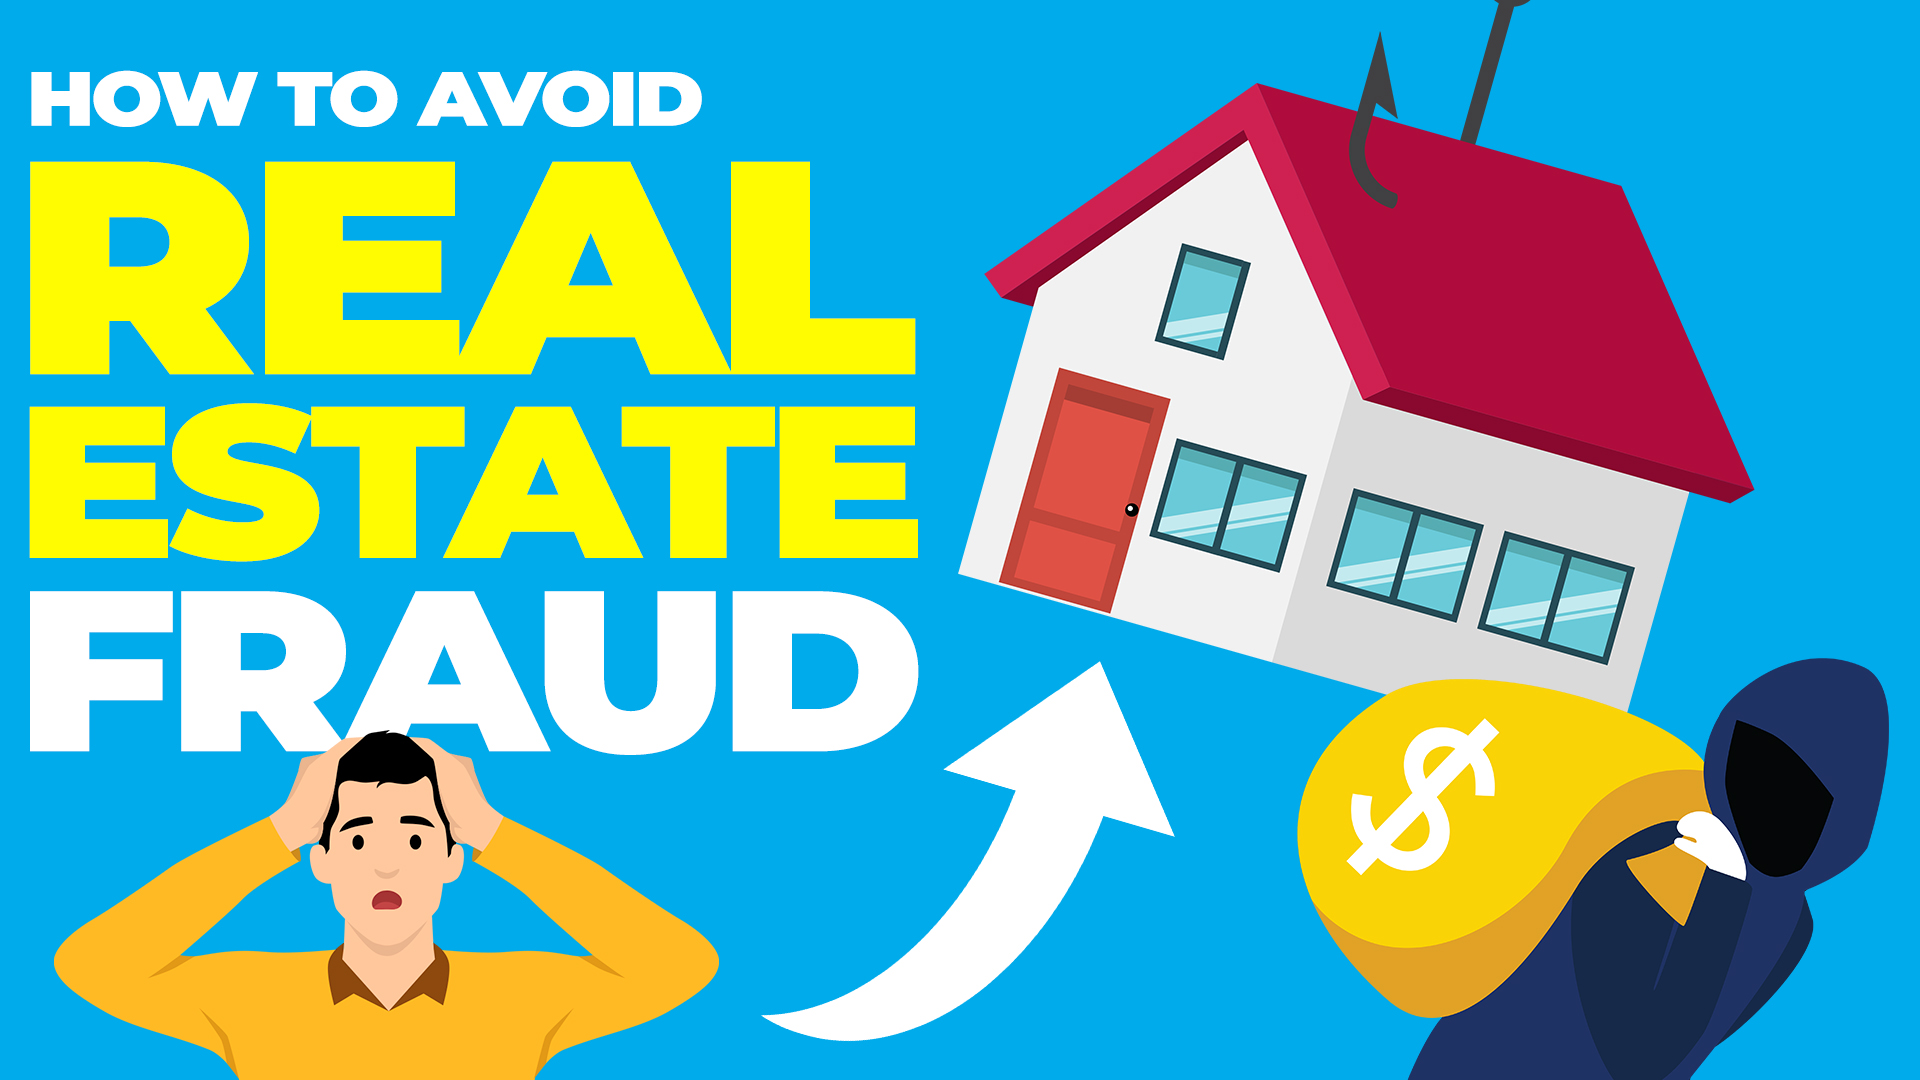 How to Avoid Common Real Estate Wire Frauds that Target Buyers